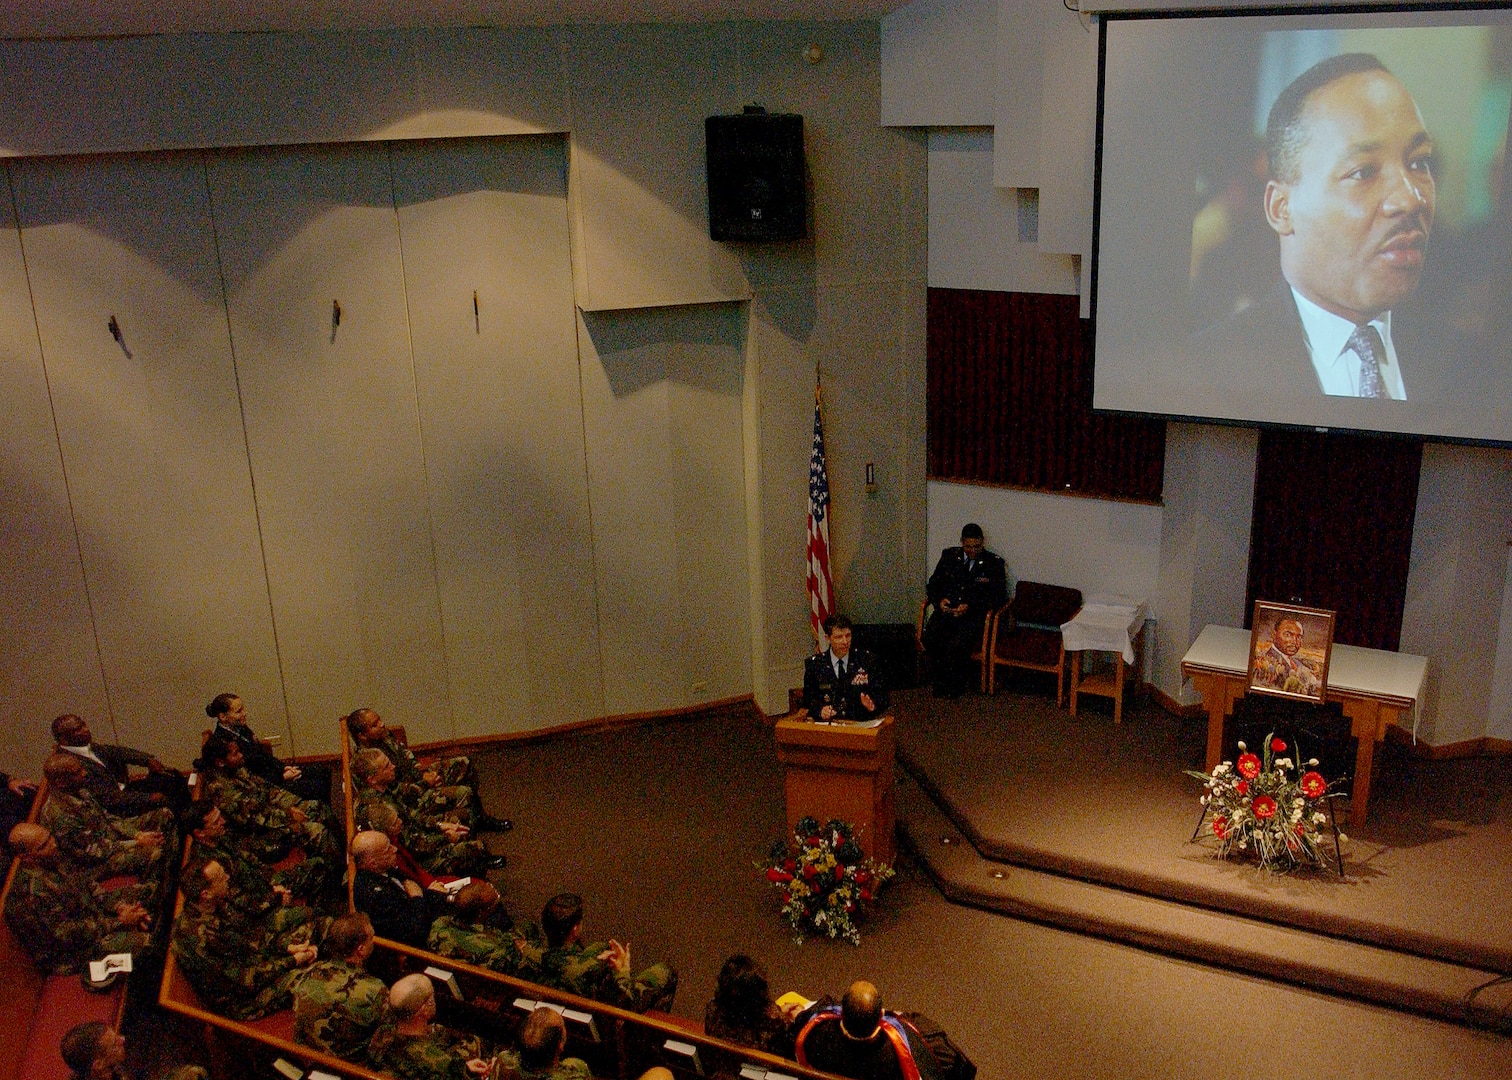 As a photo of the late civil rights leader is projected on the altar behind him, Brig. Gen. Darrell Jones, then the commander of the 37th Training Wing at Lackland Air Force Base, Texas, welcomes members of Team Lackland to a commemorative service Jan. 11, 2007, at Freedom Chapel honoring Dr. Martin Luther King Jr. Guest speaker for the service was a longtime Lackland choir director, Bradley Scott, Ph.D., senior education associate for the Intercultural Development Research Association. (USAF photo by Alan Boedeker)                               